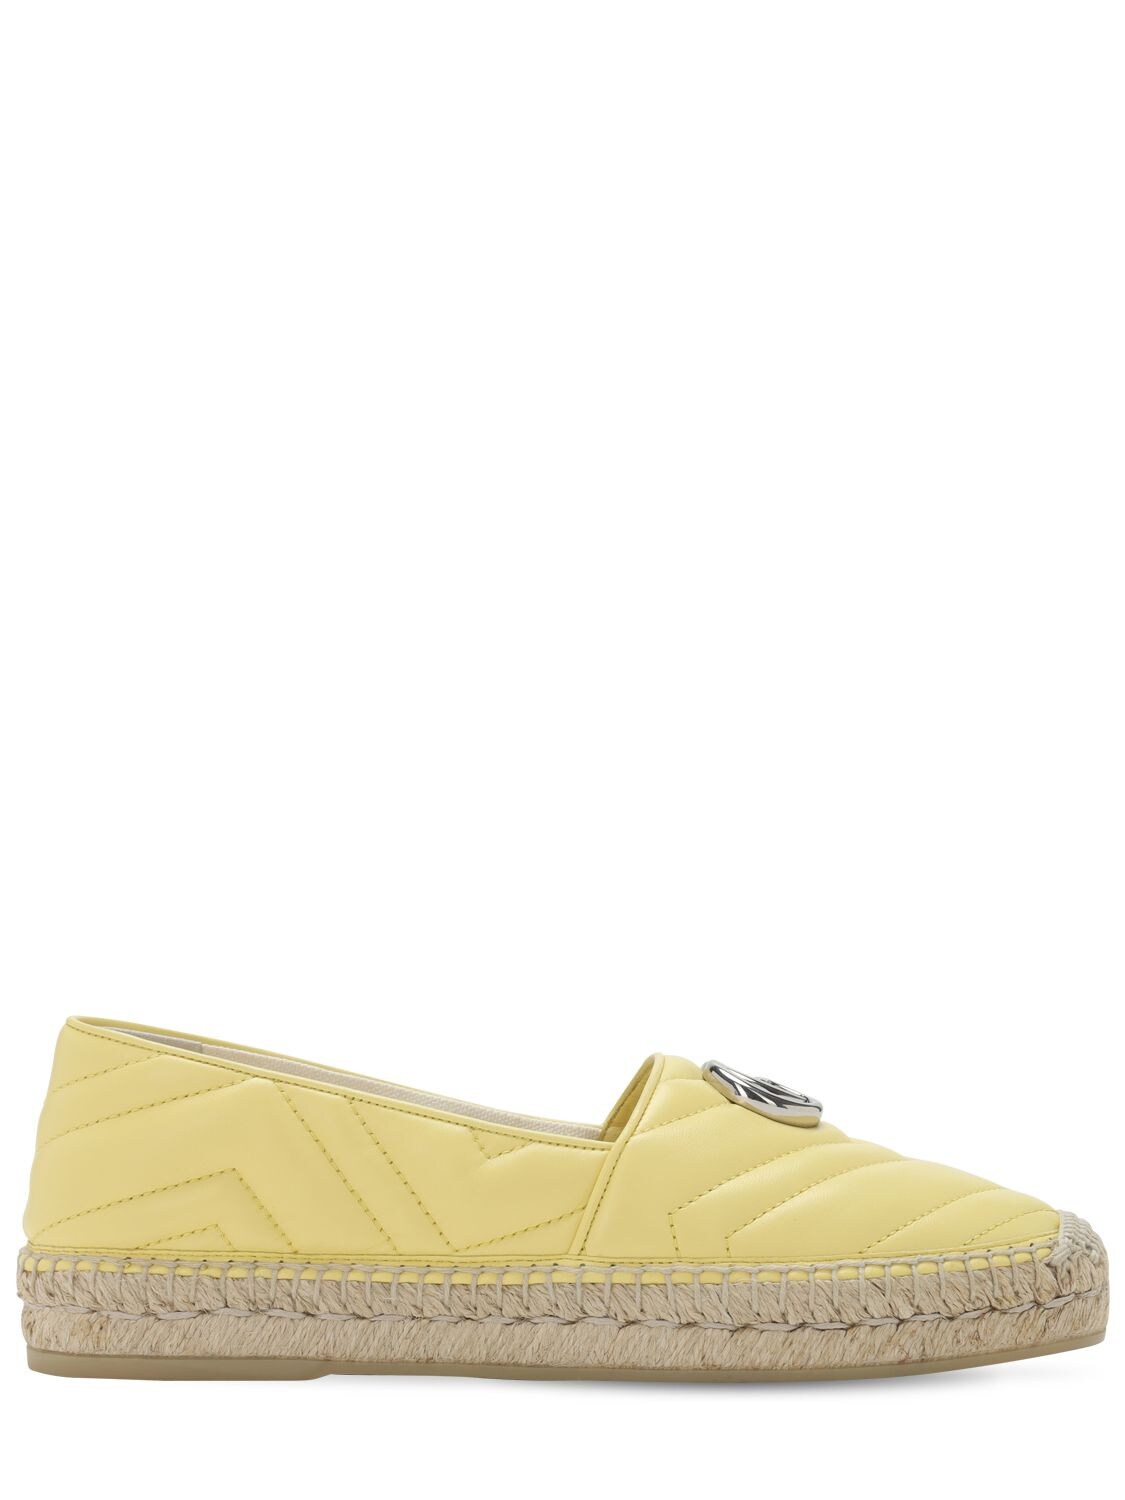 Gucci 20mm Pilar Quilted Leather Espadrilles In Light Yellow